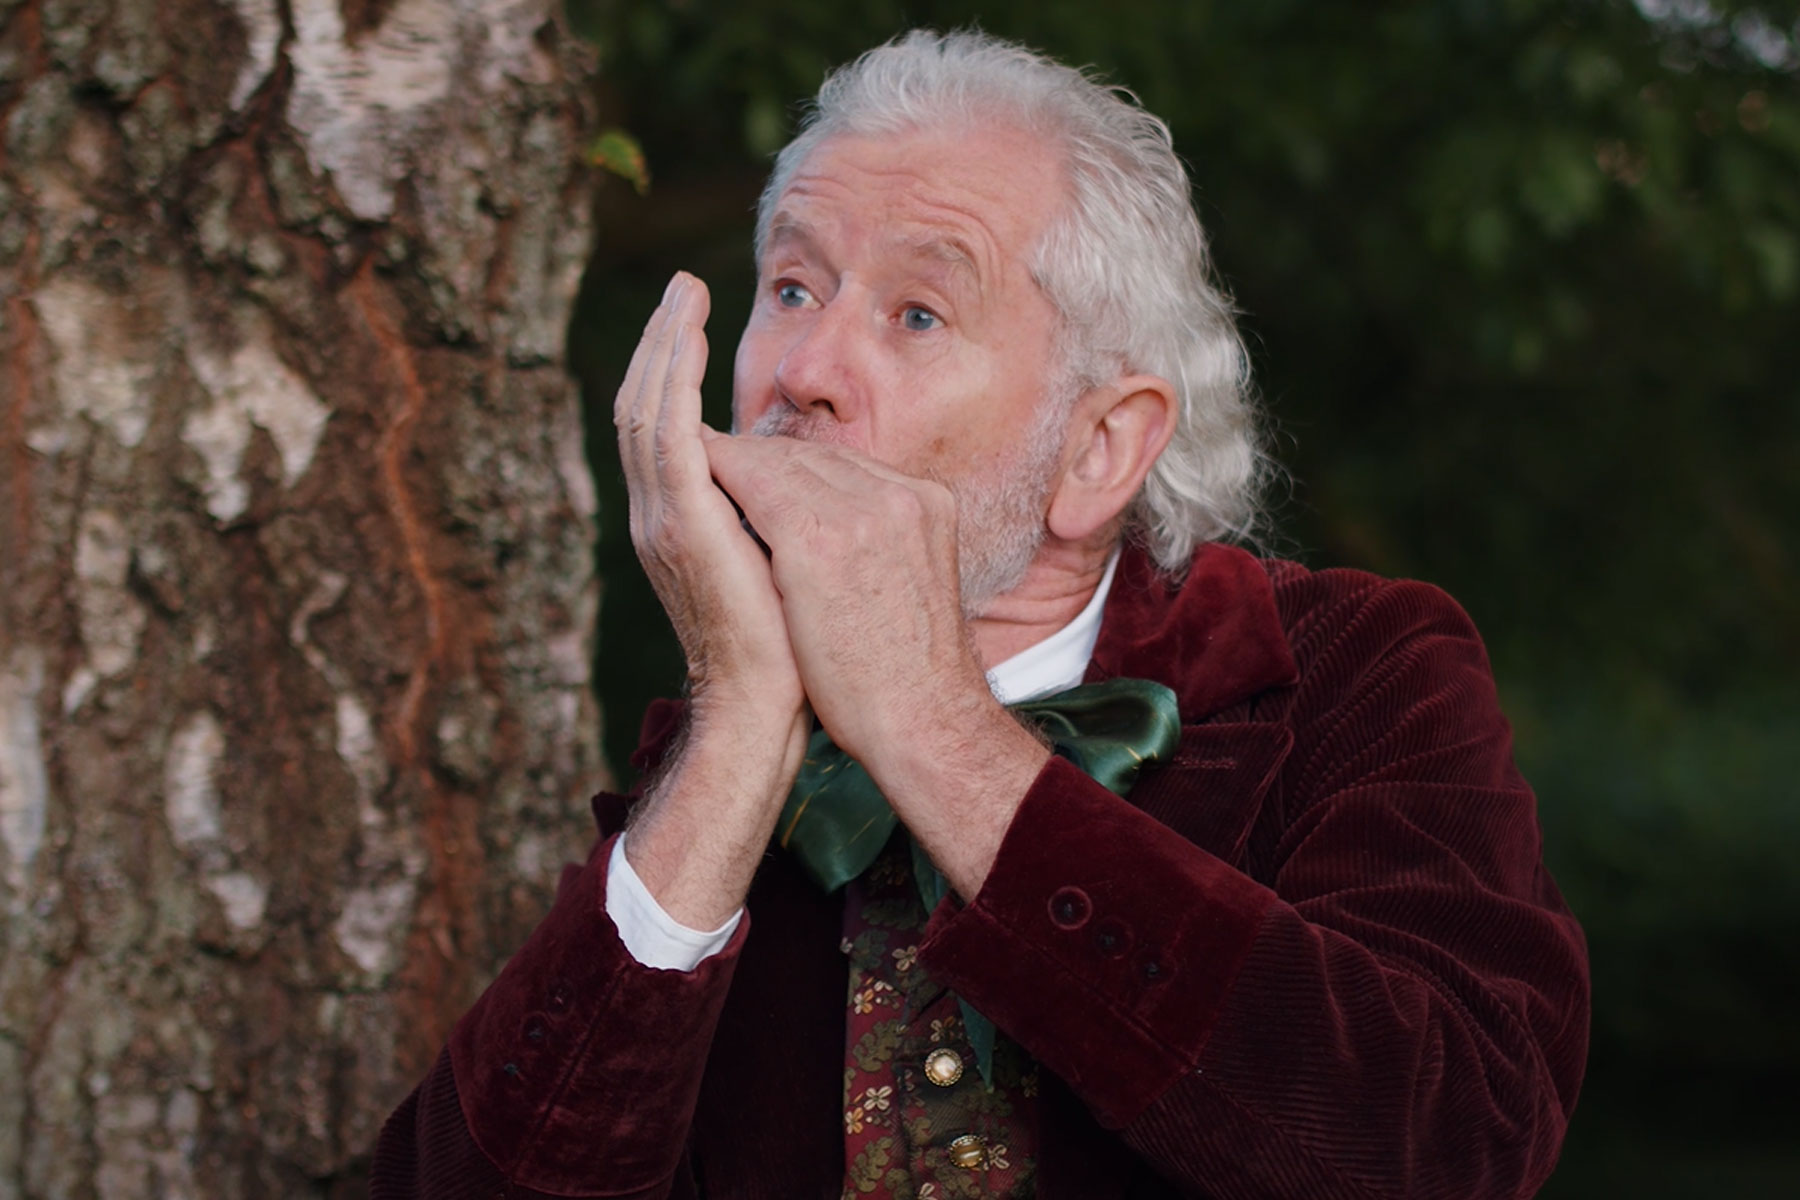 A smartly dressed hobbit plays the harmonica next to a tree